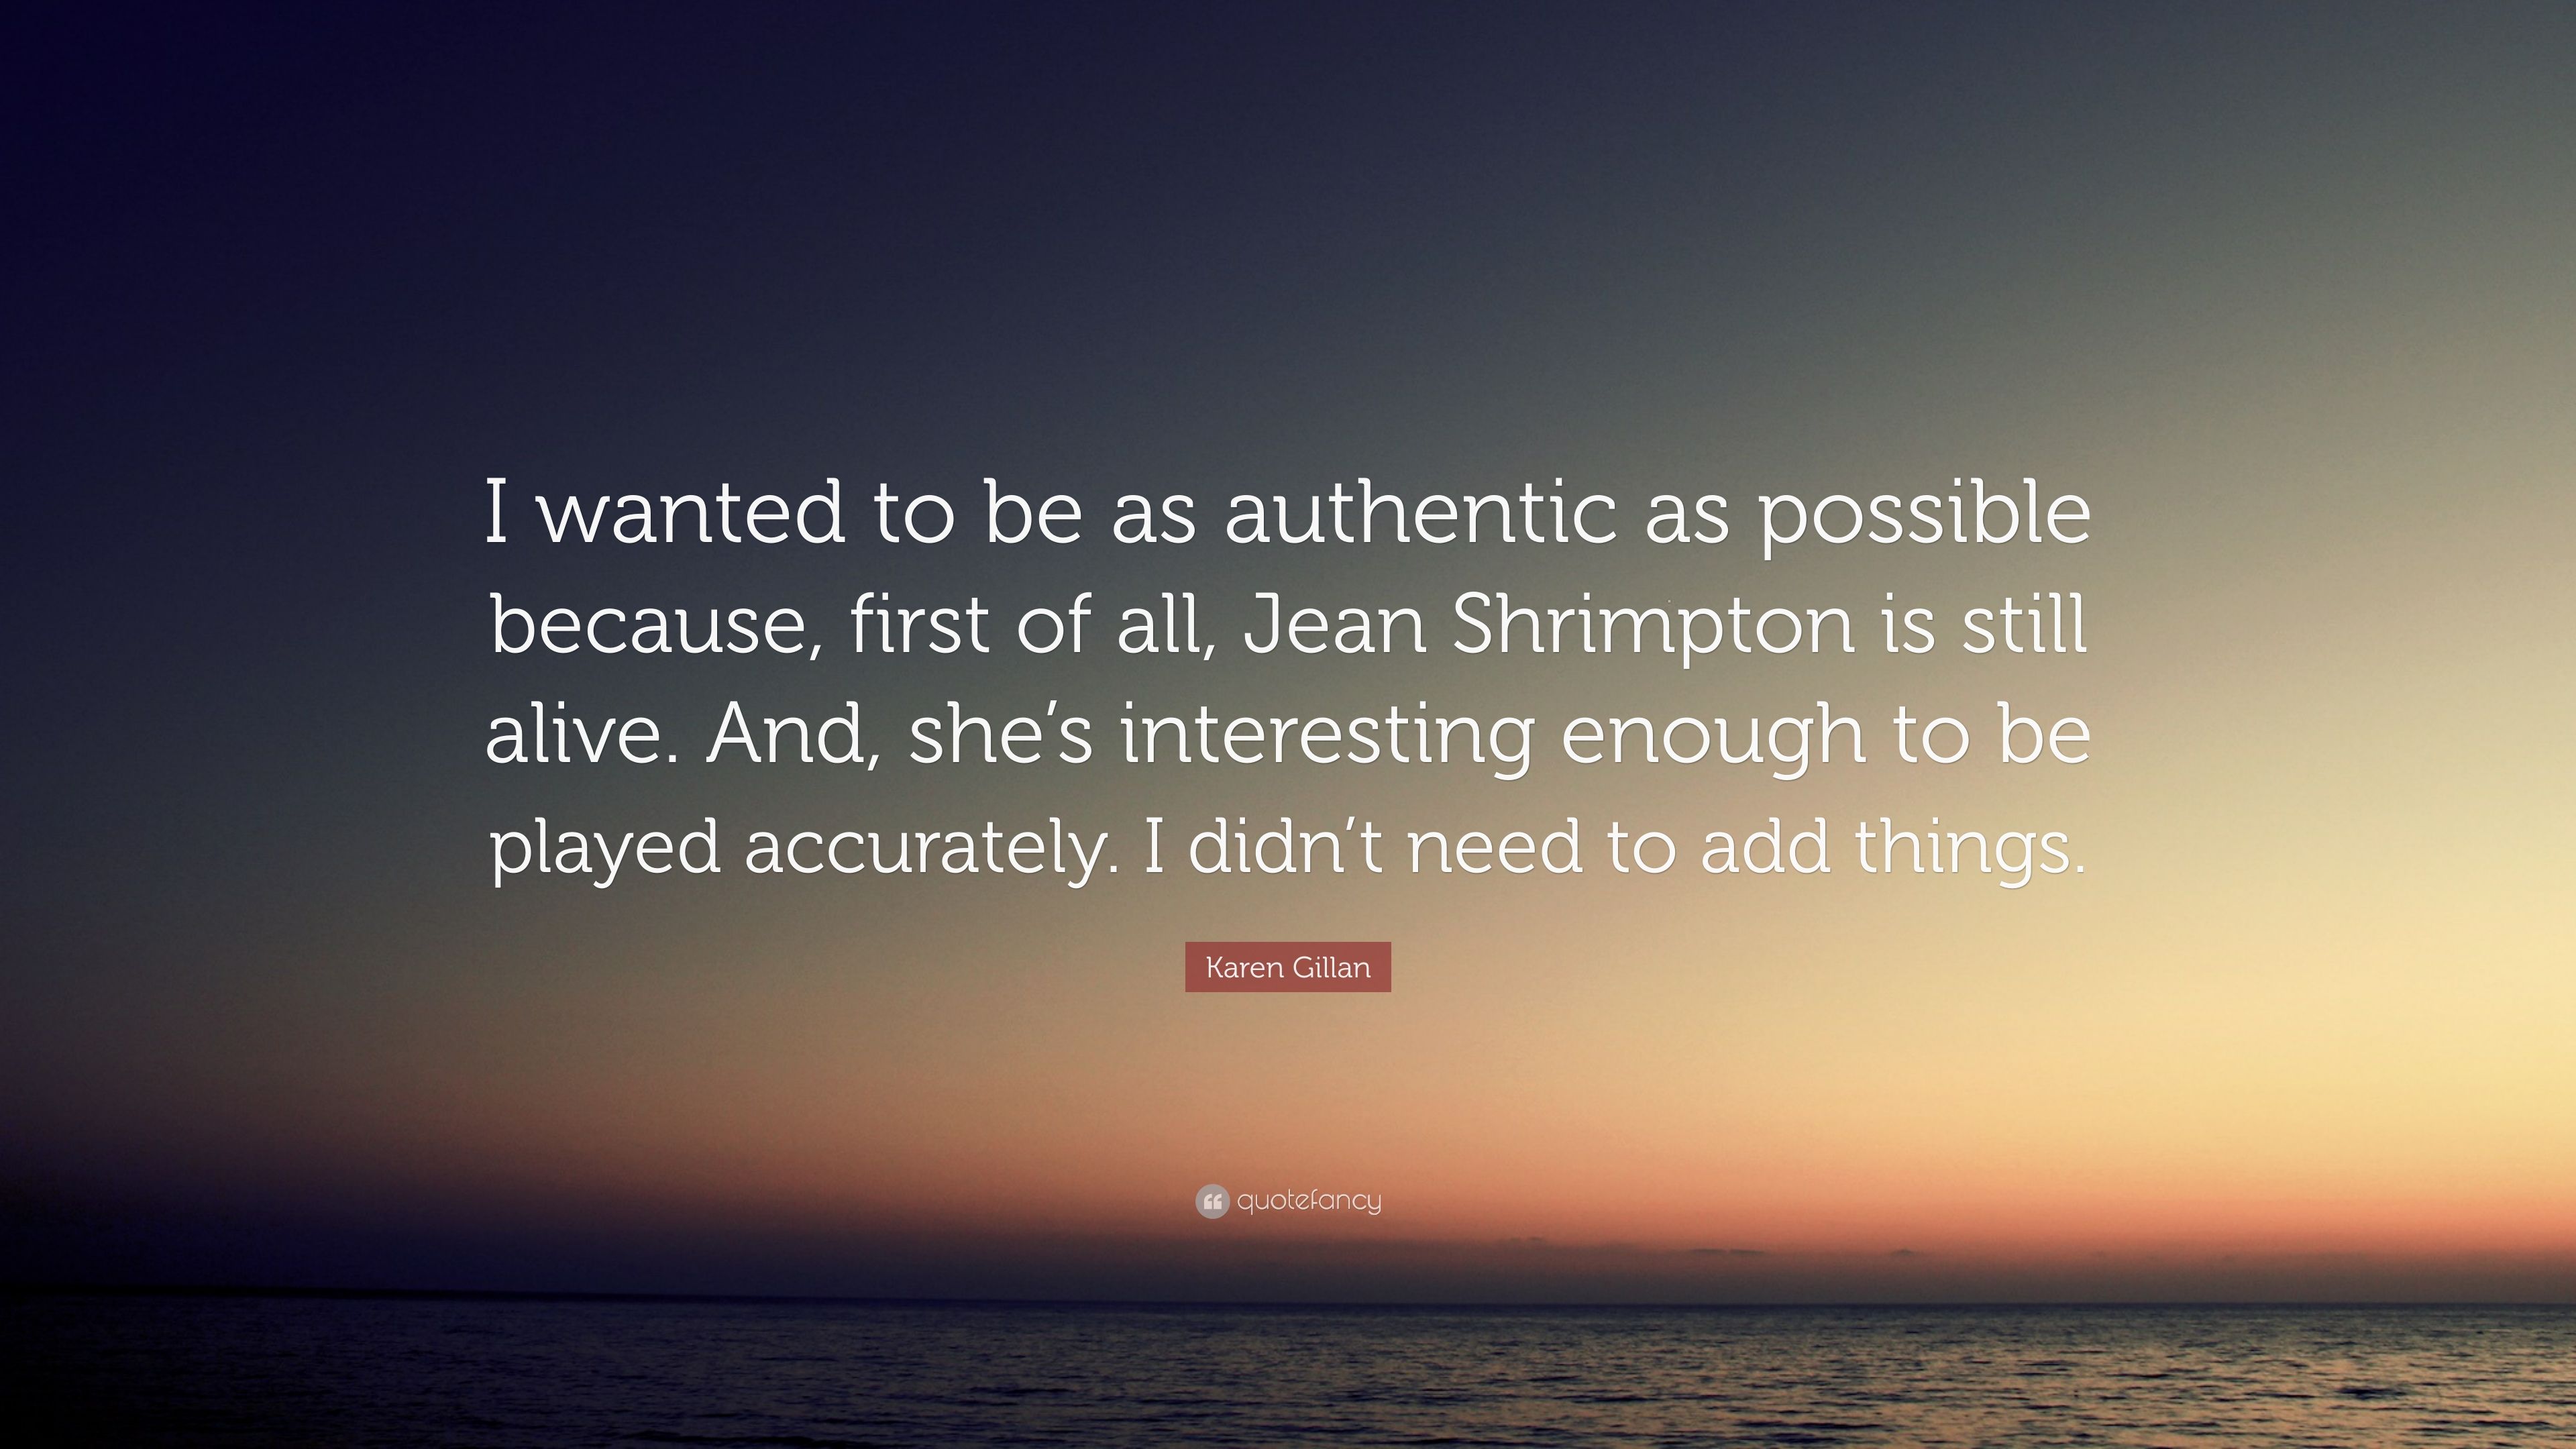 Karen Gillan Quote: “I wanted to be as authentic as possible